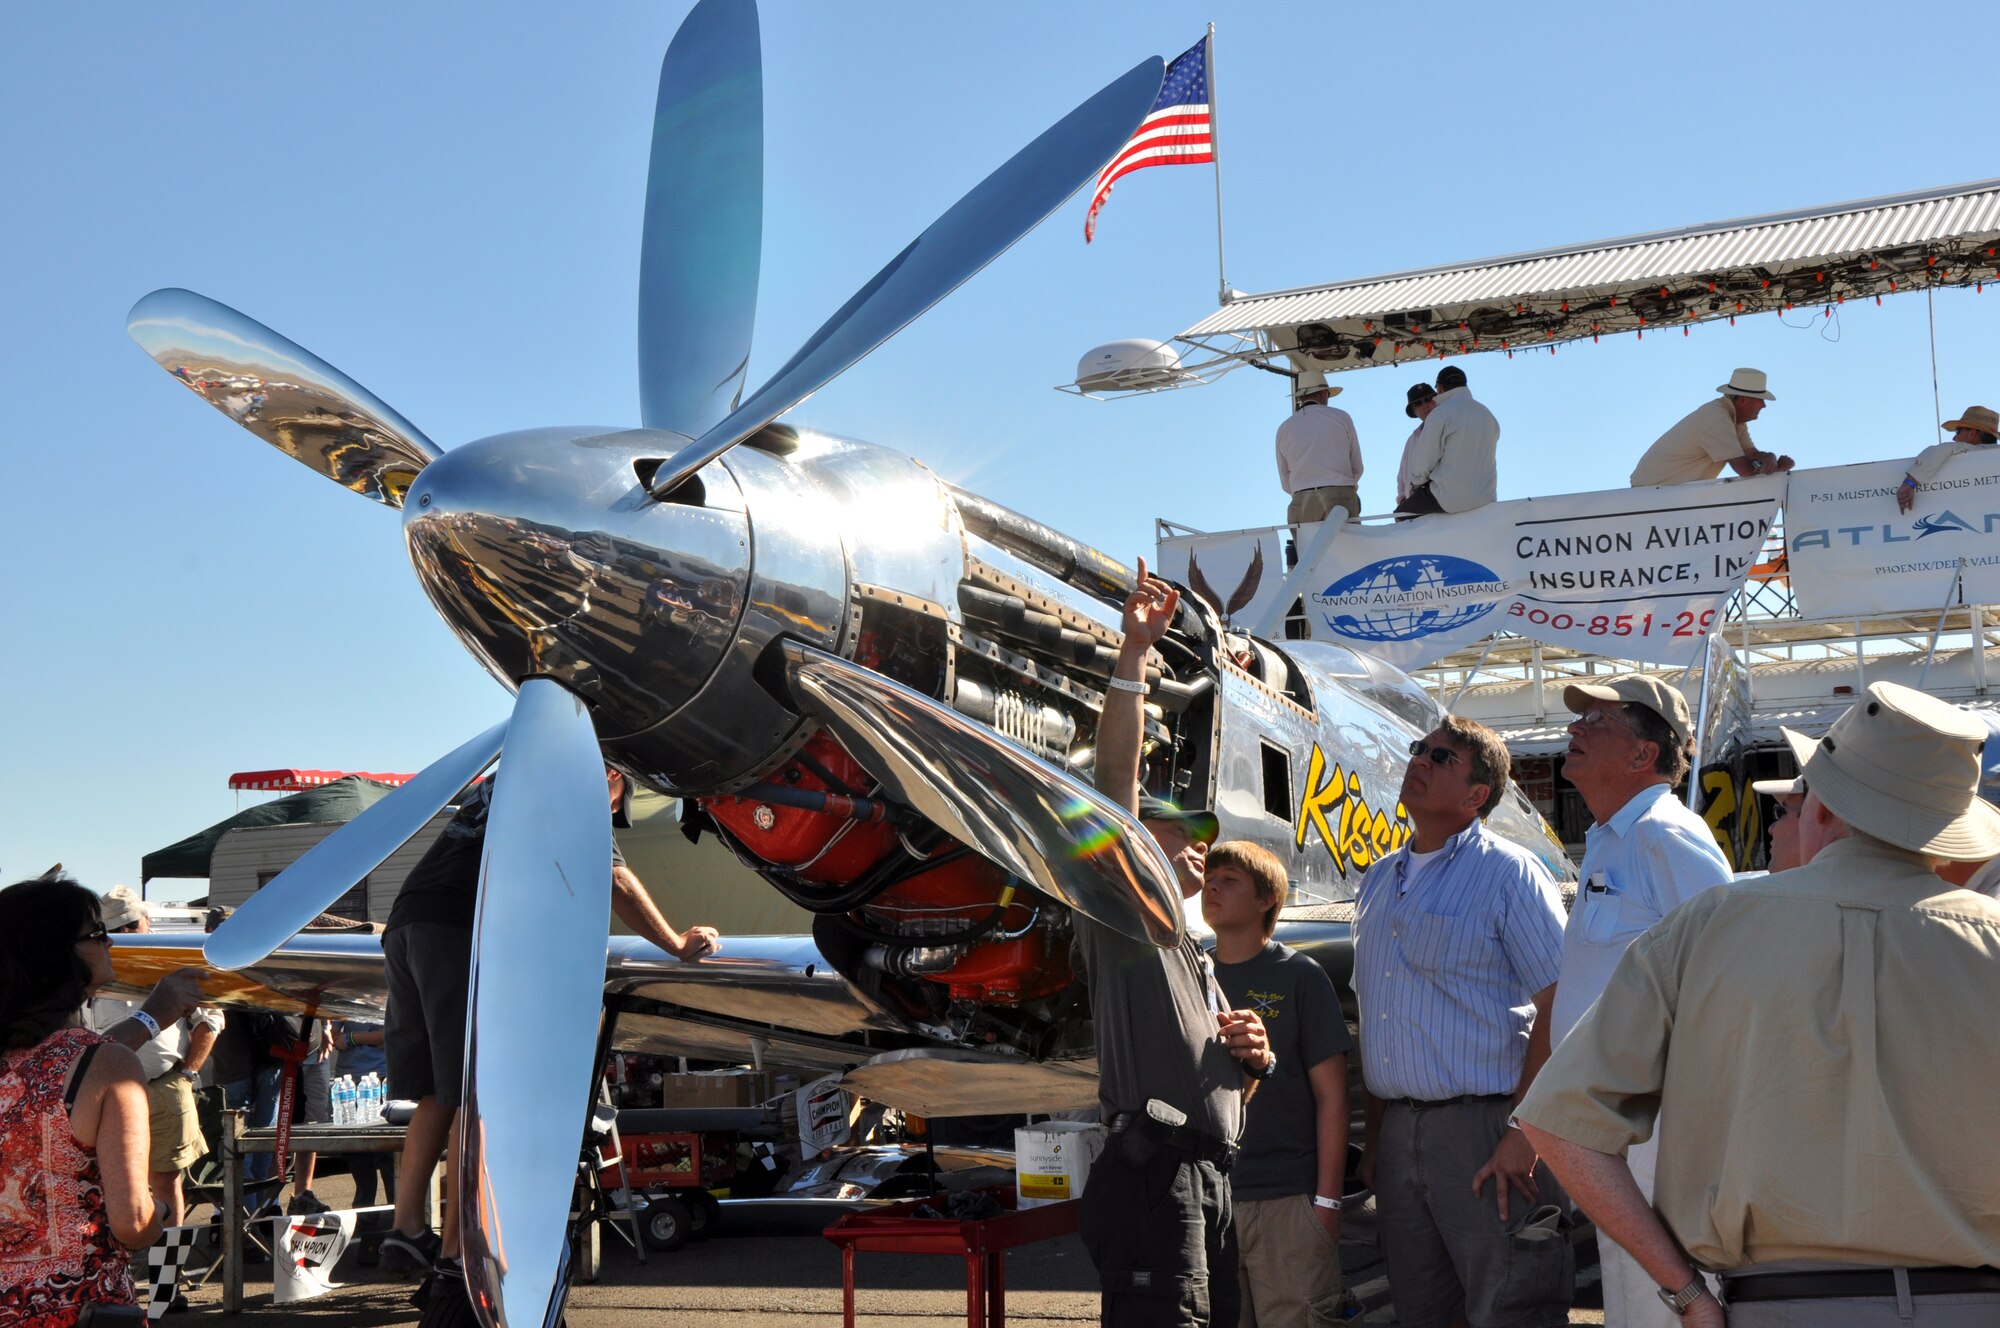 A pilot explains propeller modifications to his P-51 Mustang fighter aircraft during the National Championship Air Races at Stead Airport, Reno, Nev., Sept. 14, 2012. The air races have been held annually since 1963. (U.S. Air Force photo by Staff Sgt. Robert M. Trujillo/Released)